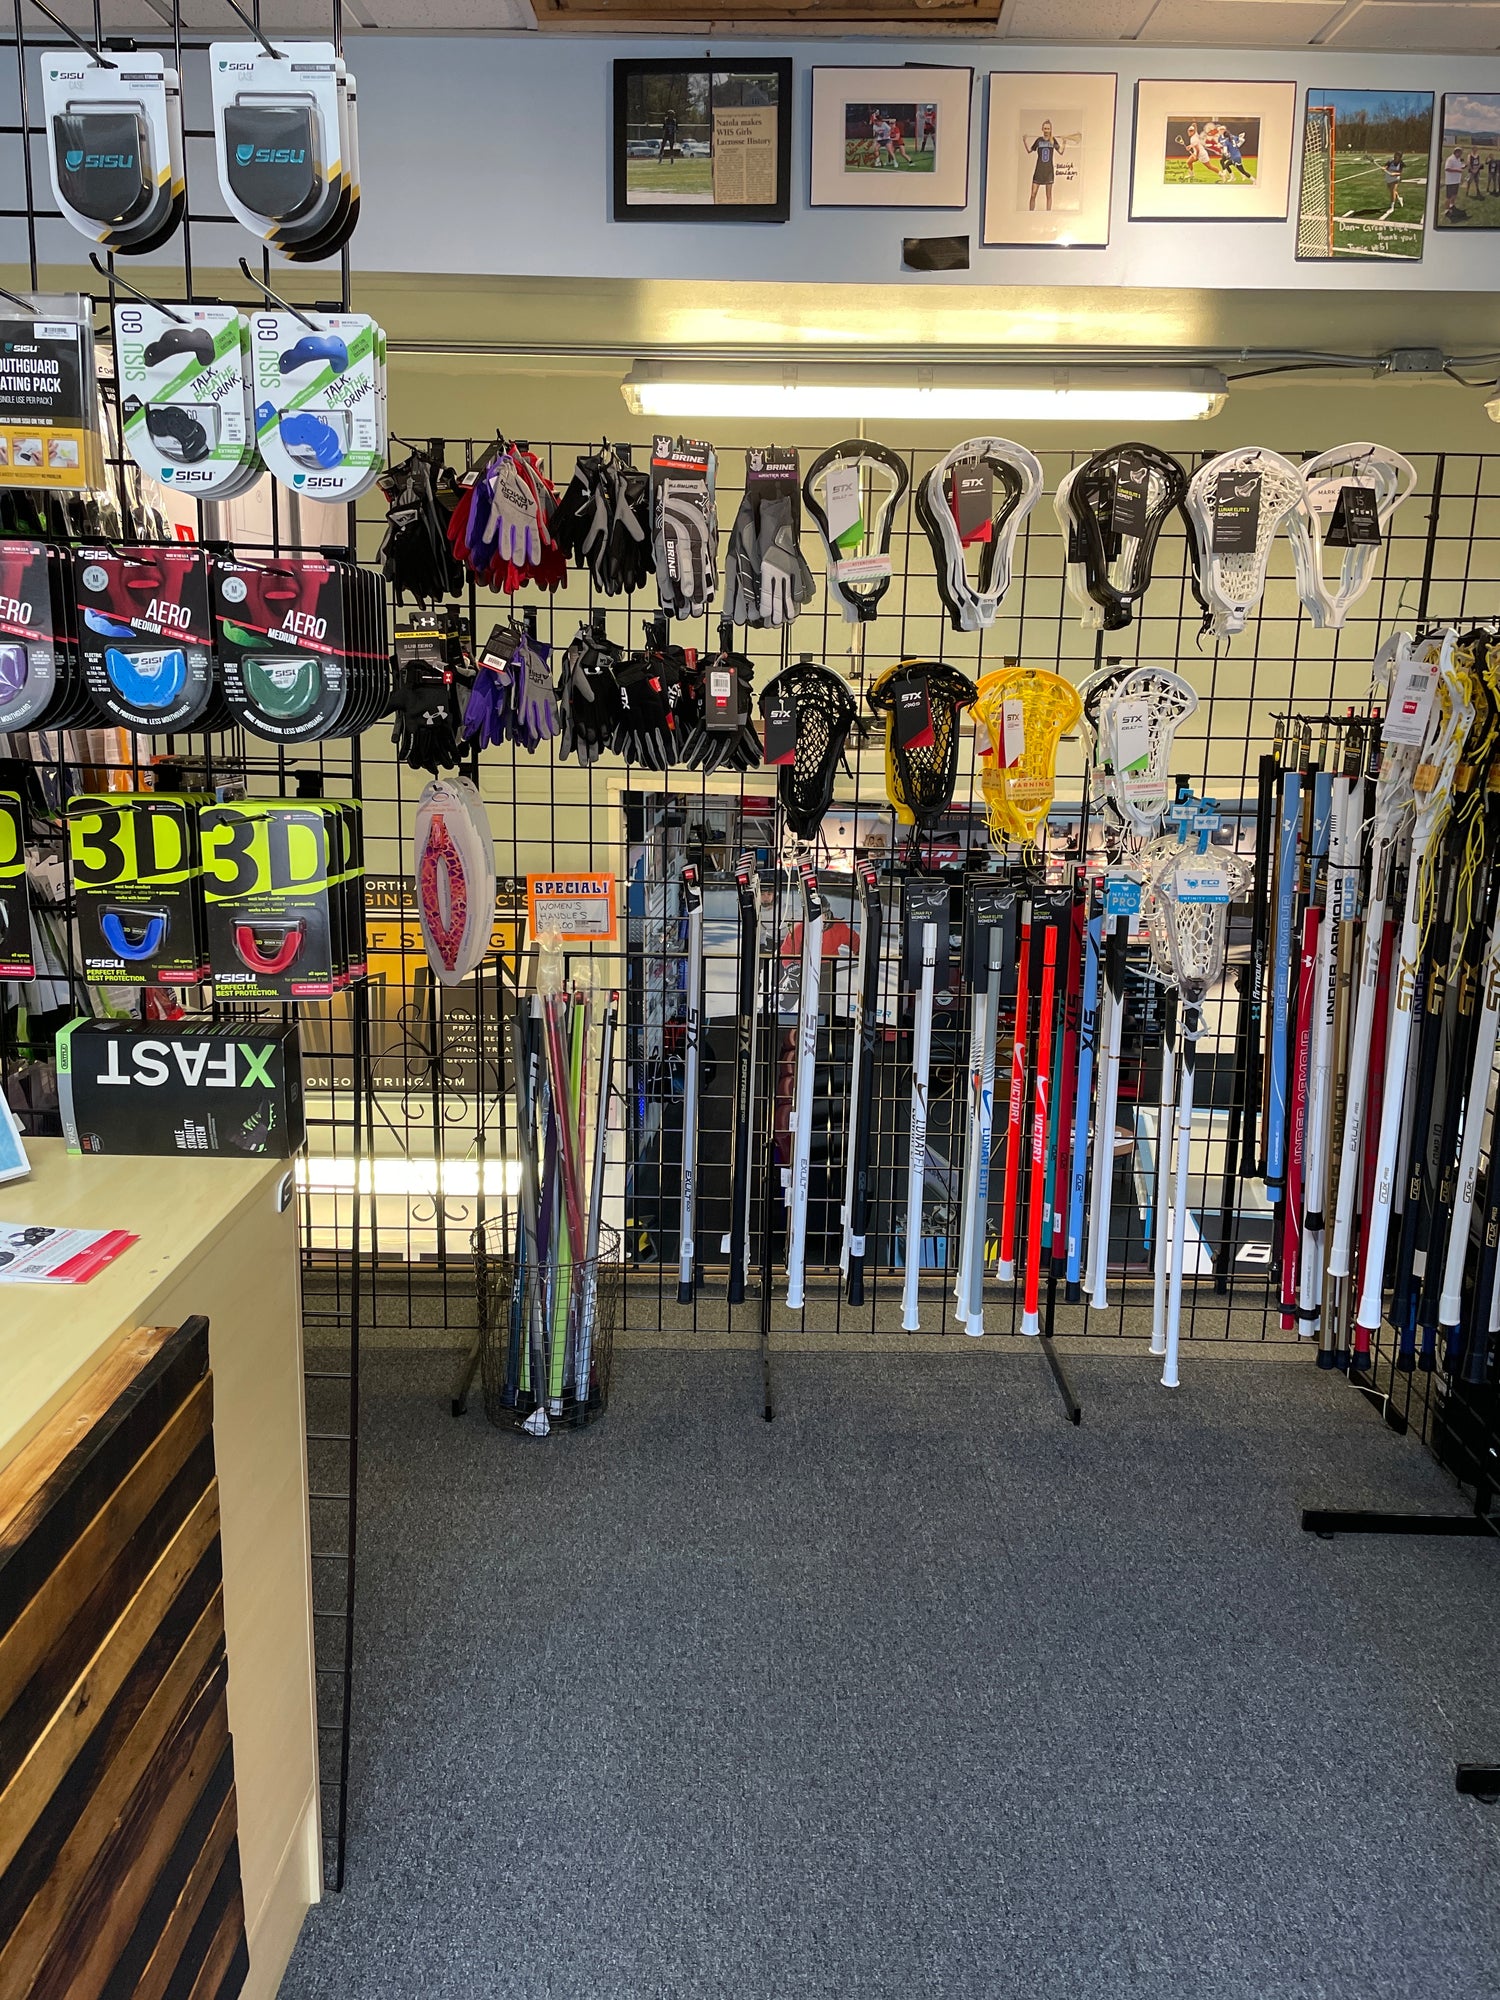 Our gear for lacrosse available at our stores.